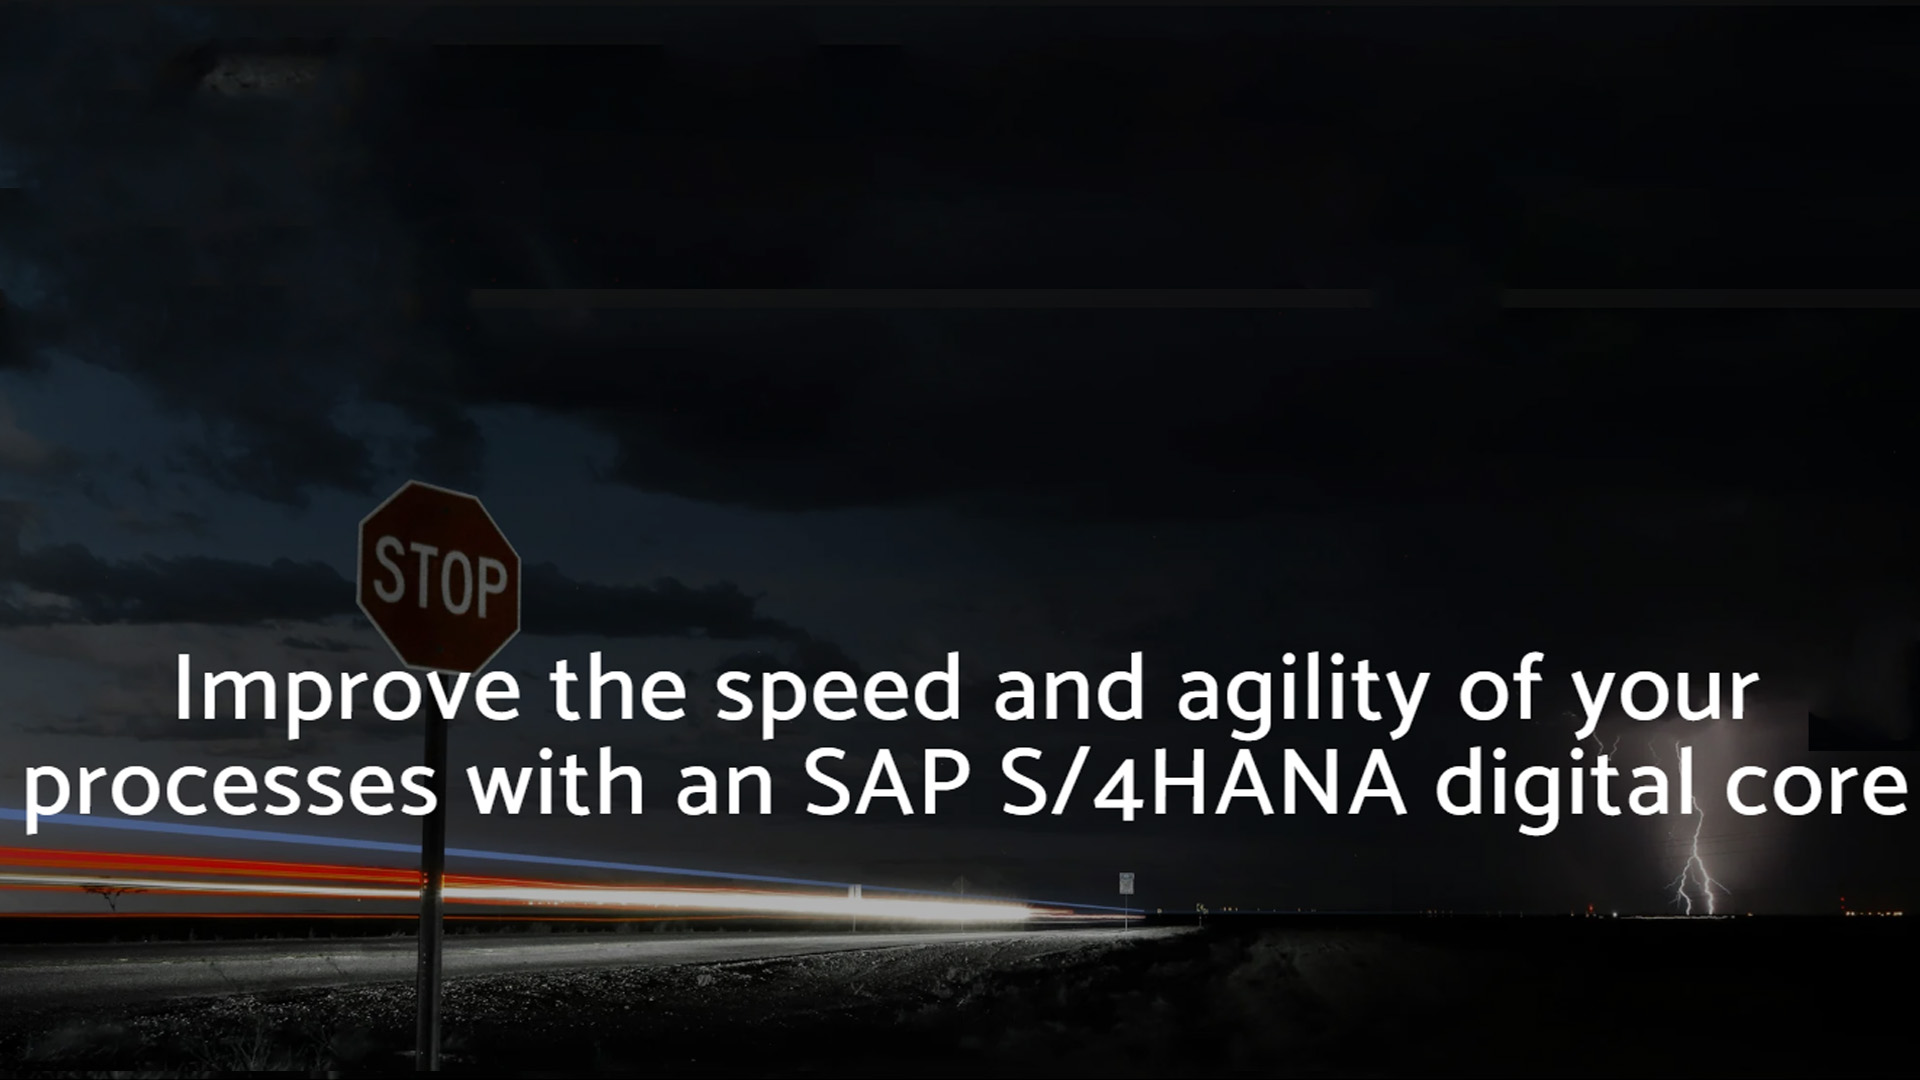 Improve the speed and agility of your processes with an SAP S/4HANA digital core